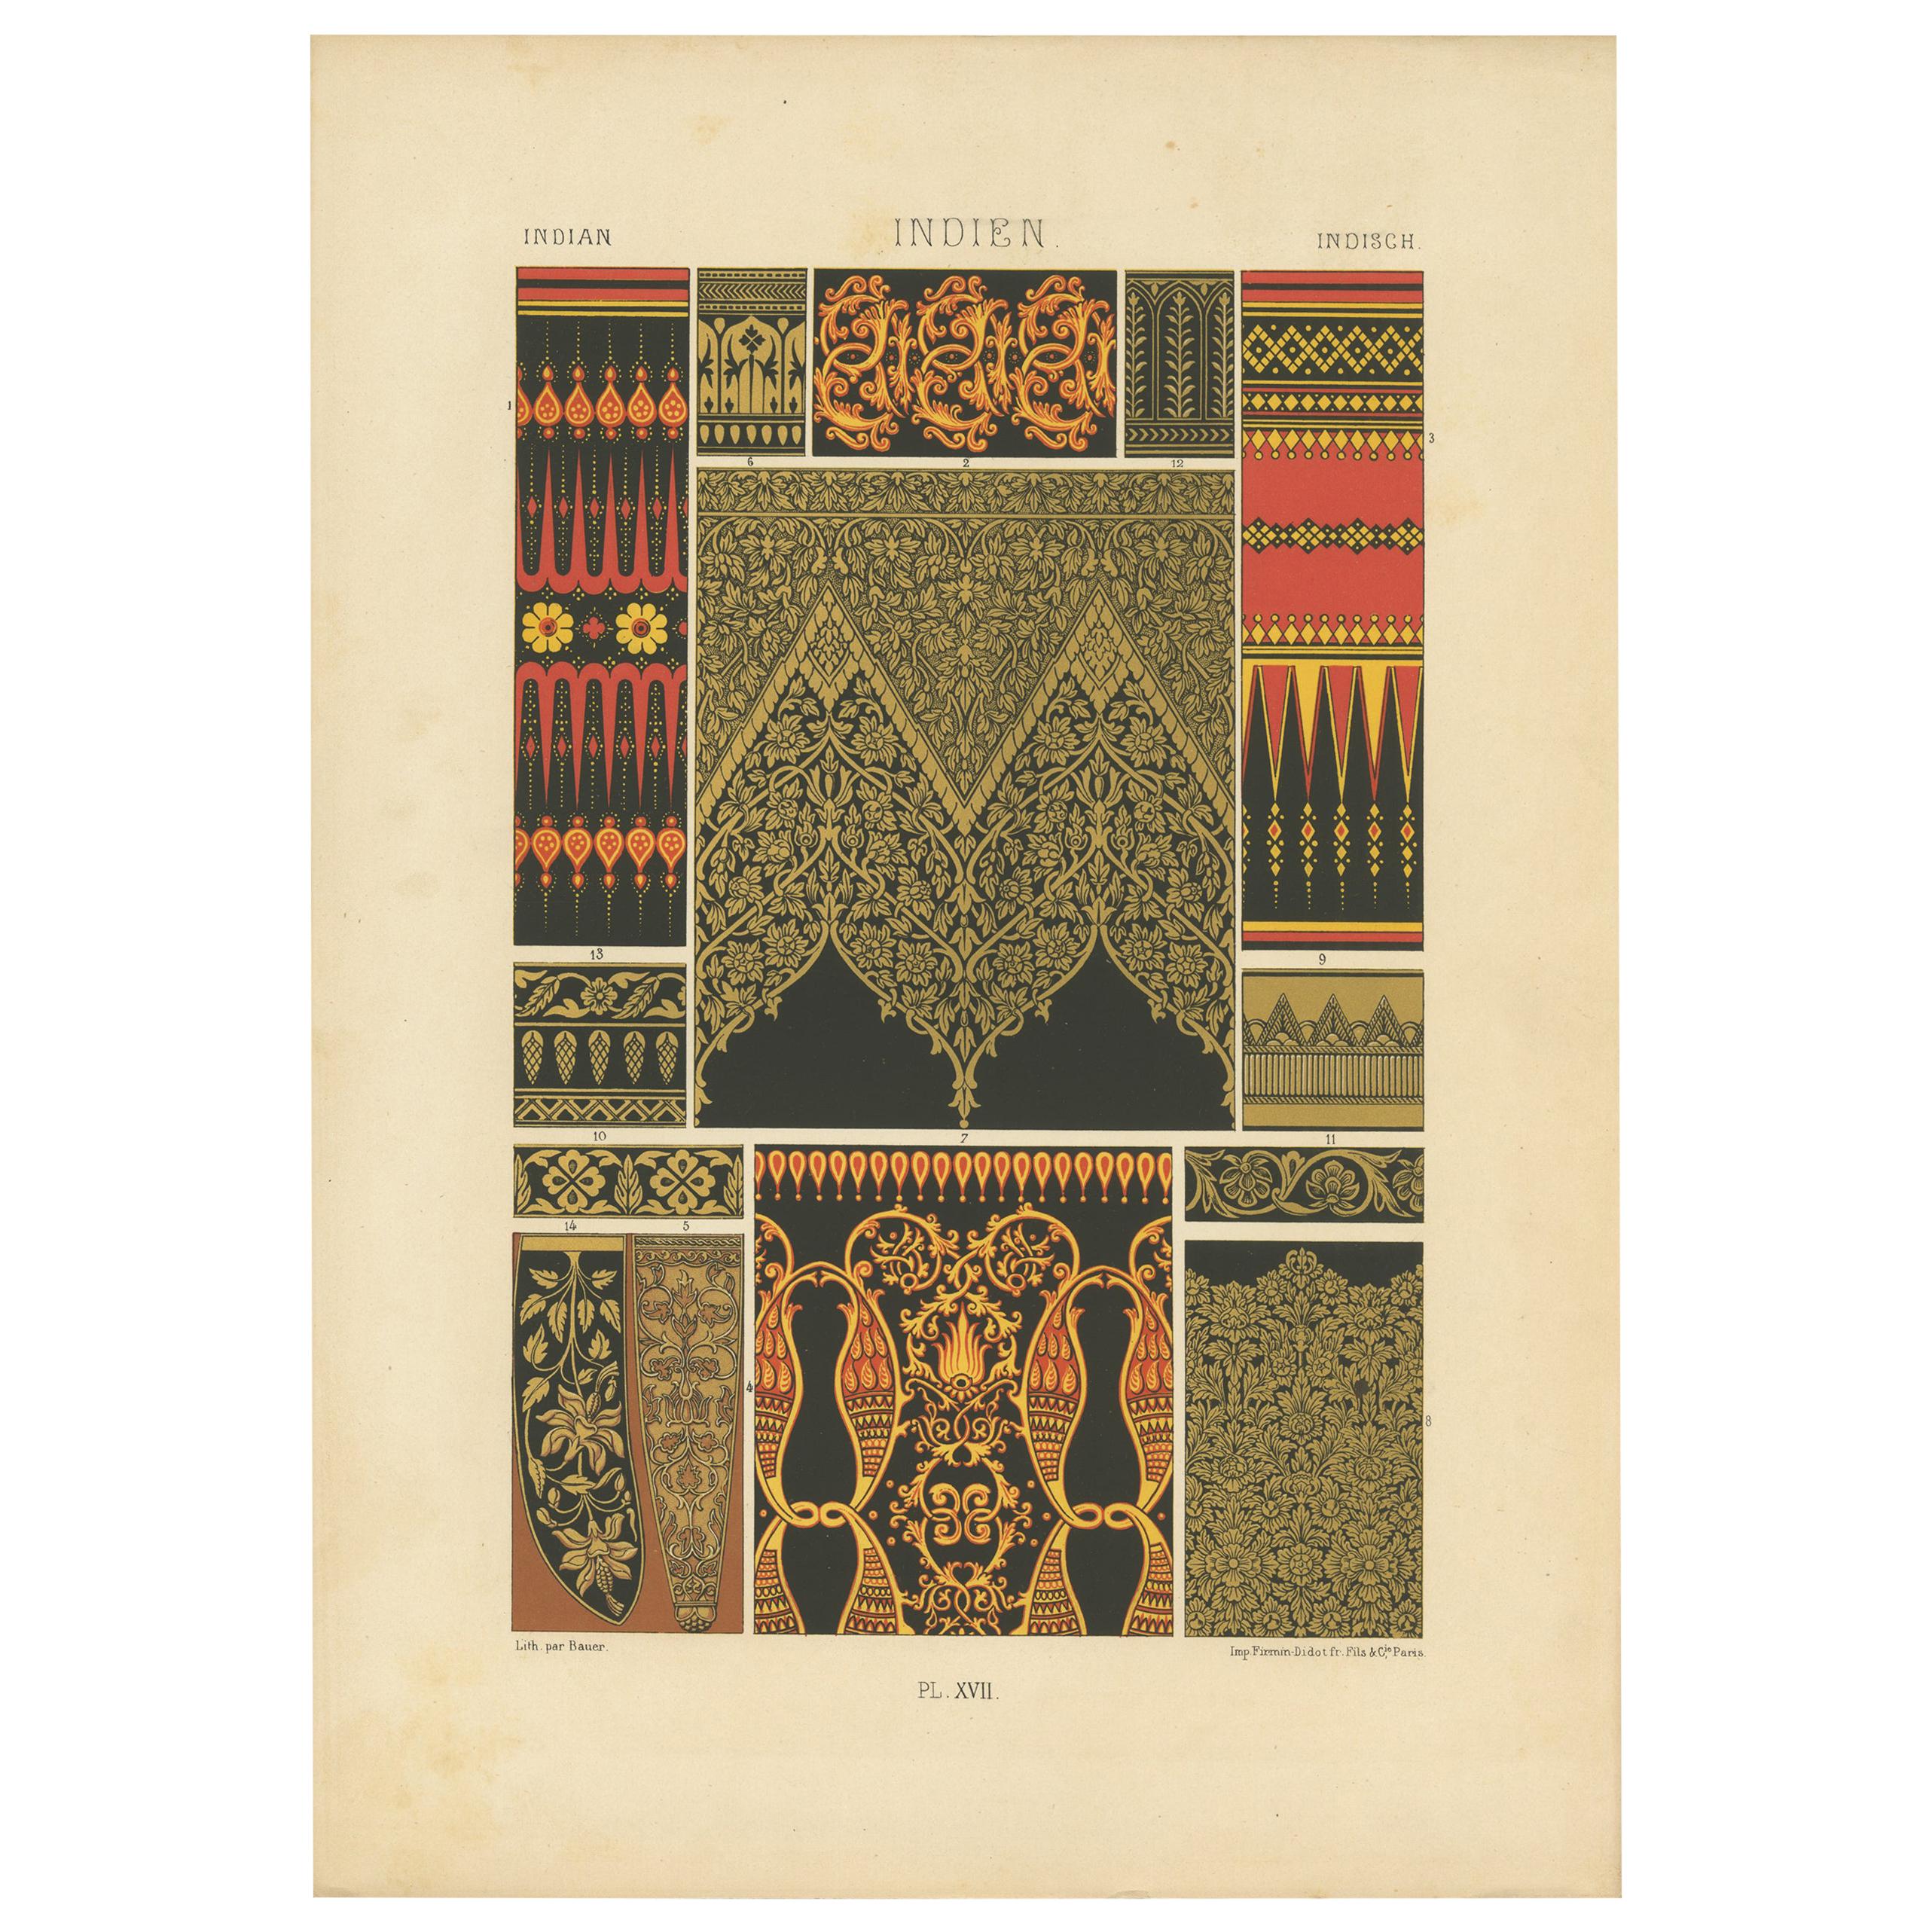 Pl. 18 Antique Print of Indian Ornaments by Racinet 'circa 1890'